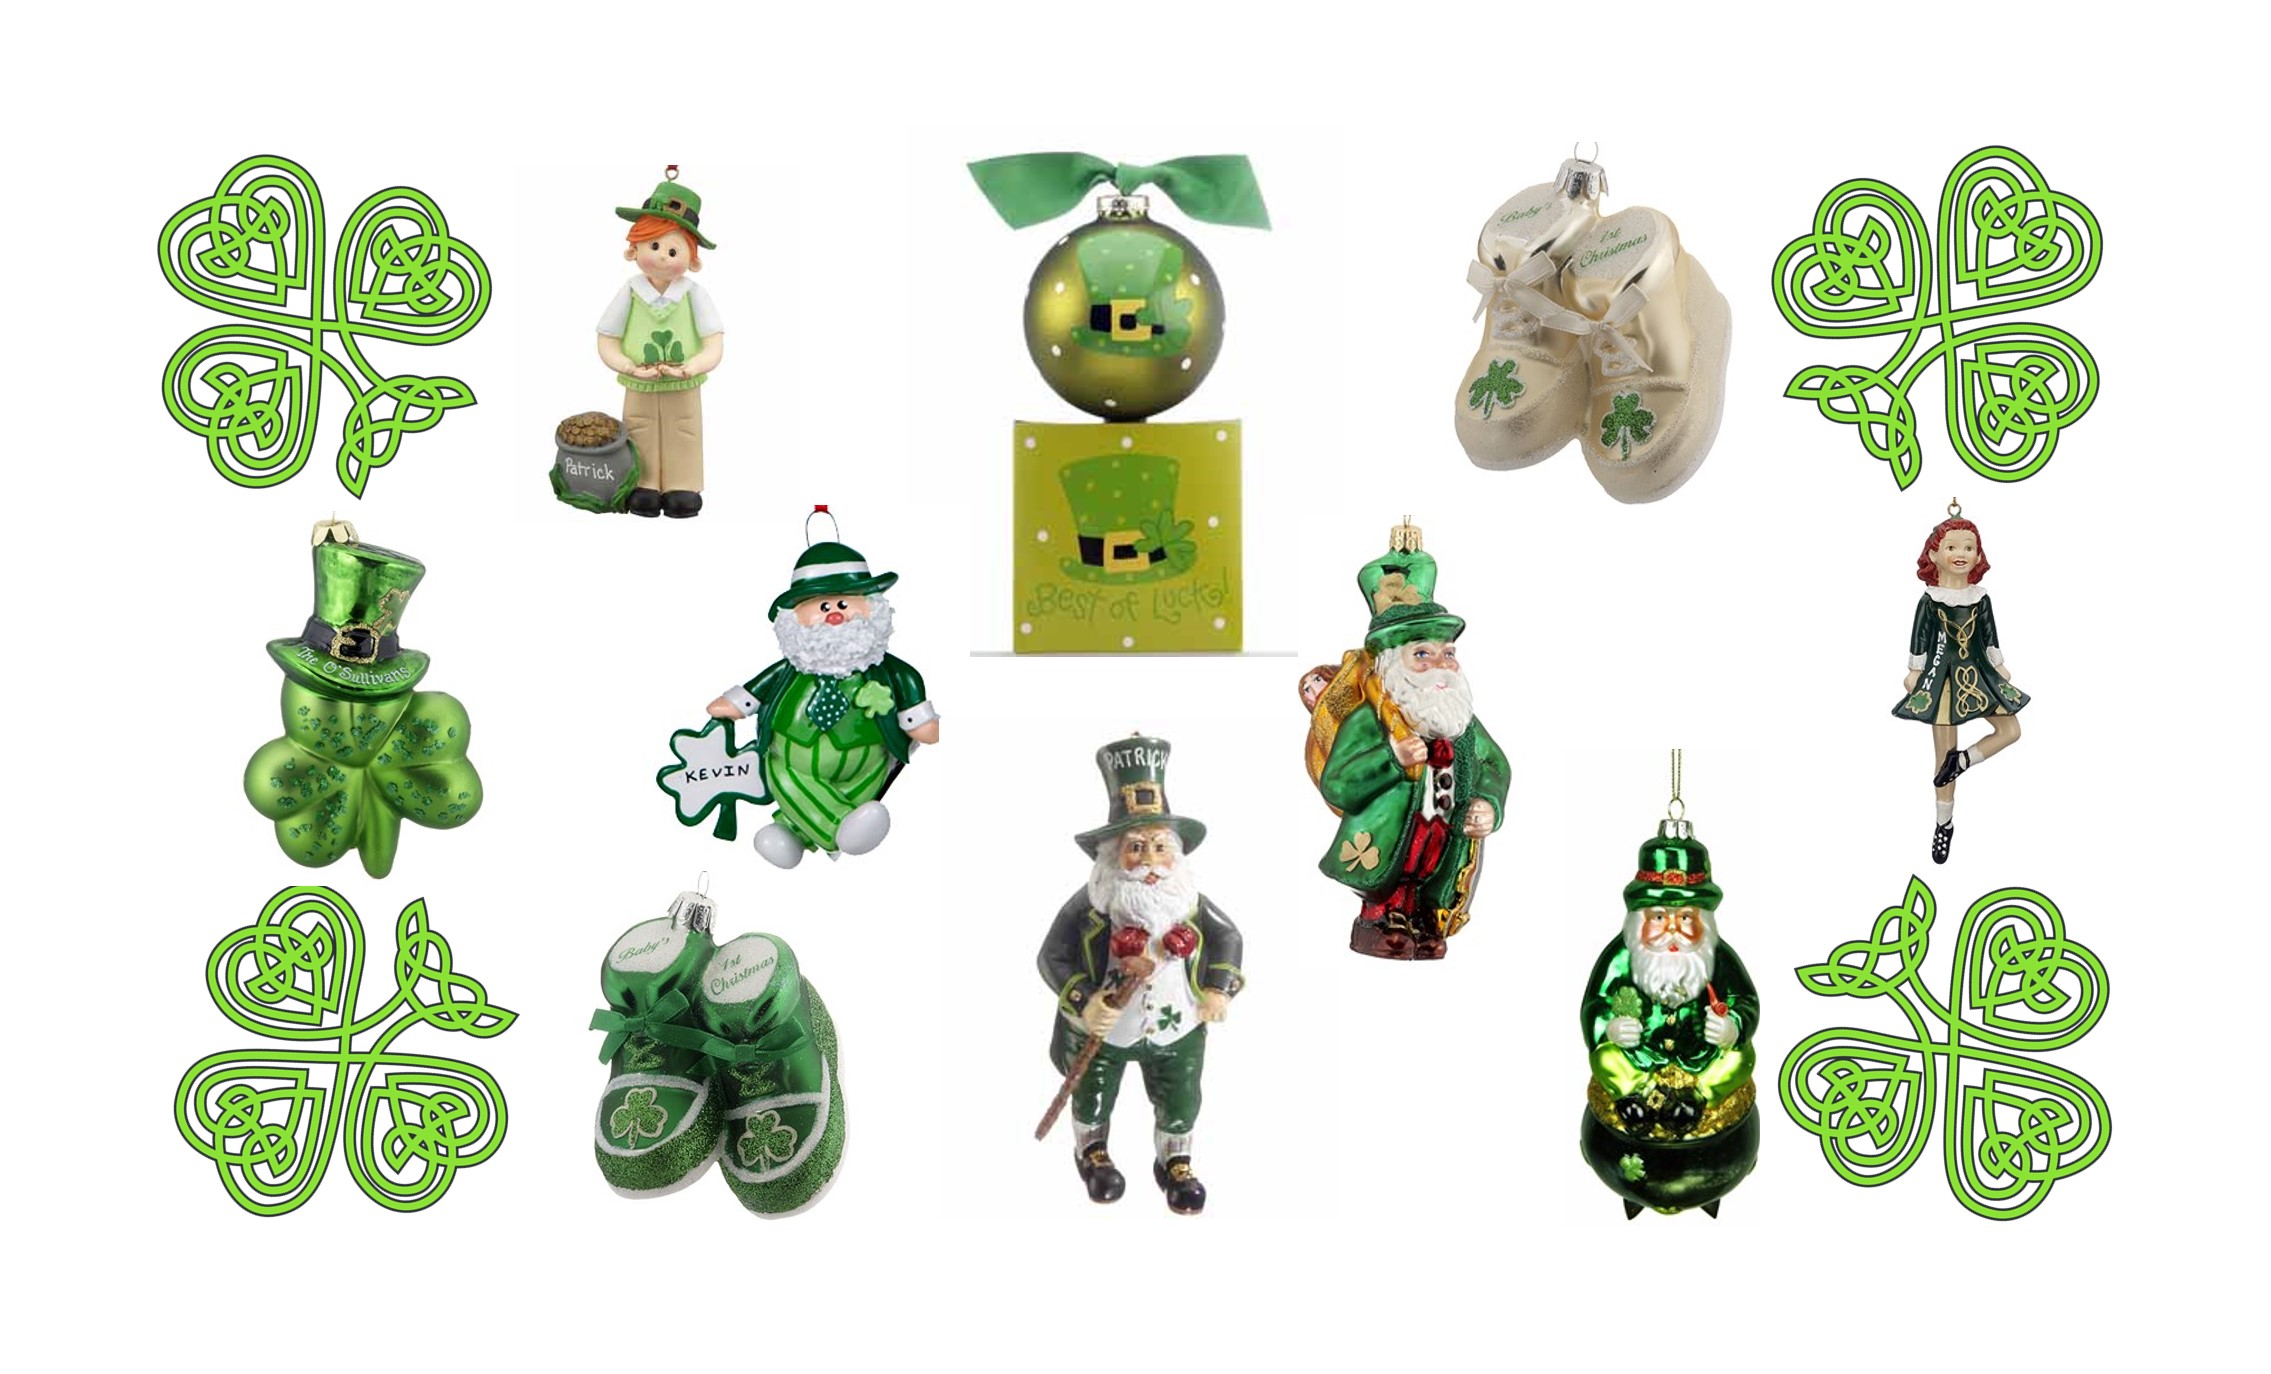 A variety of St. Patrick's Day ornaments are available at OrnamentShop.com!